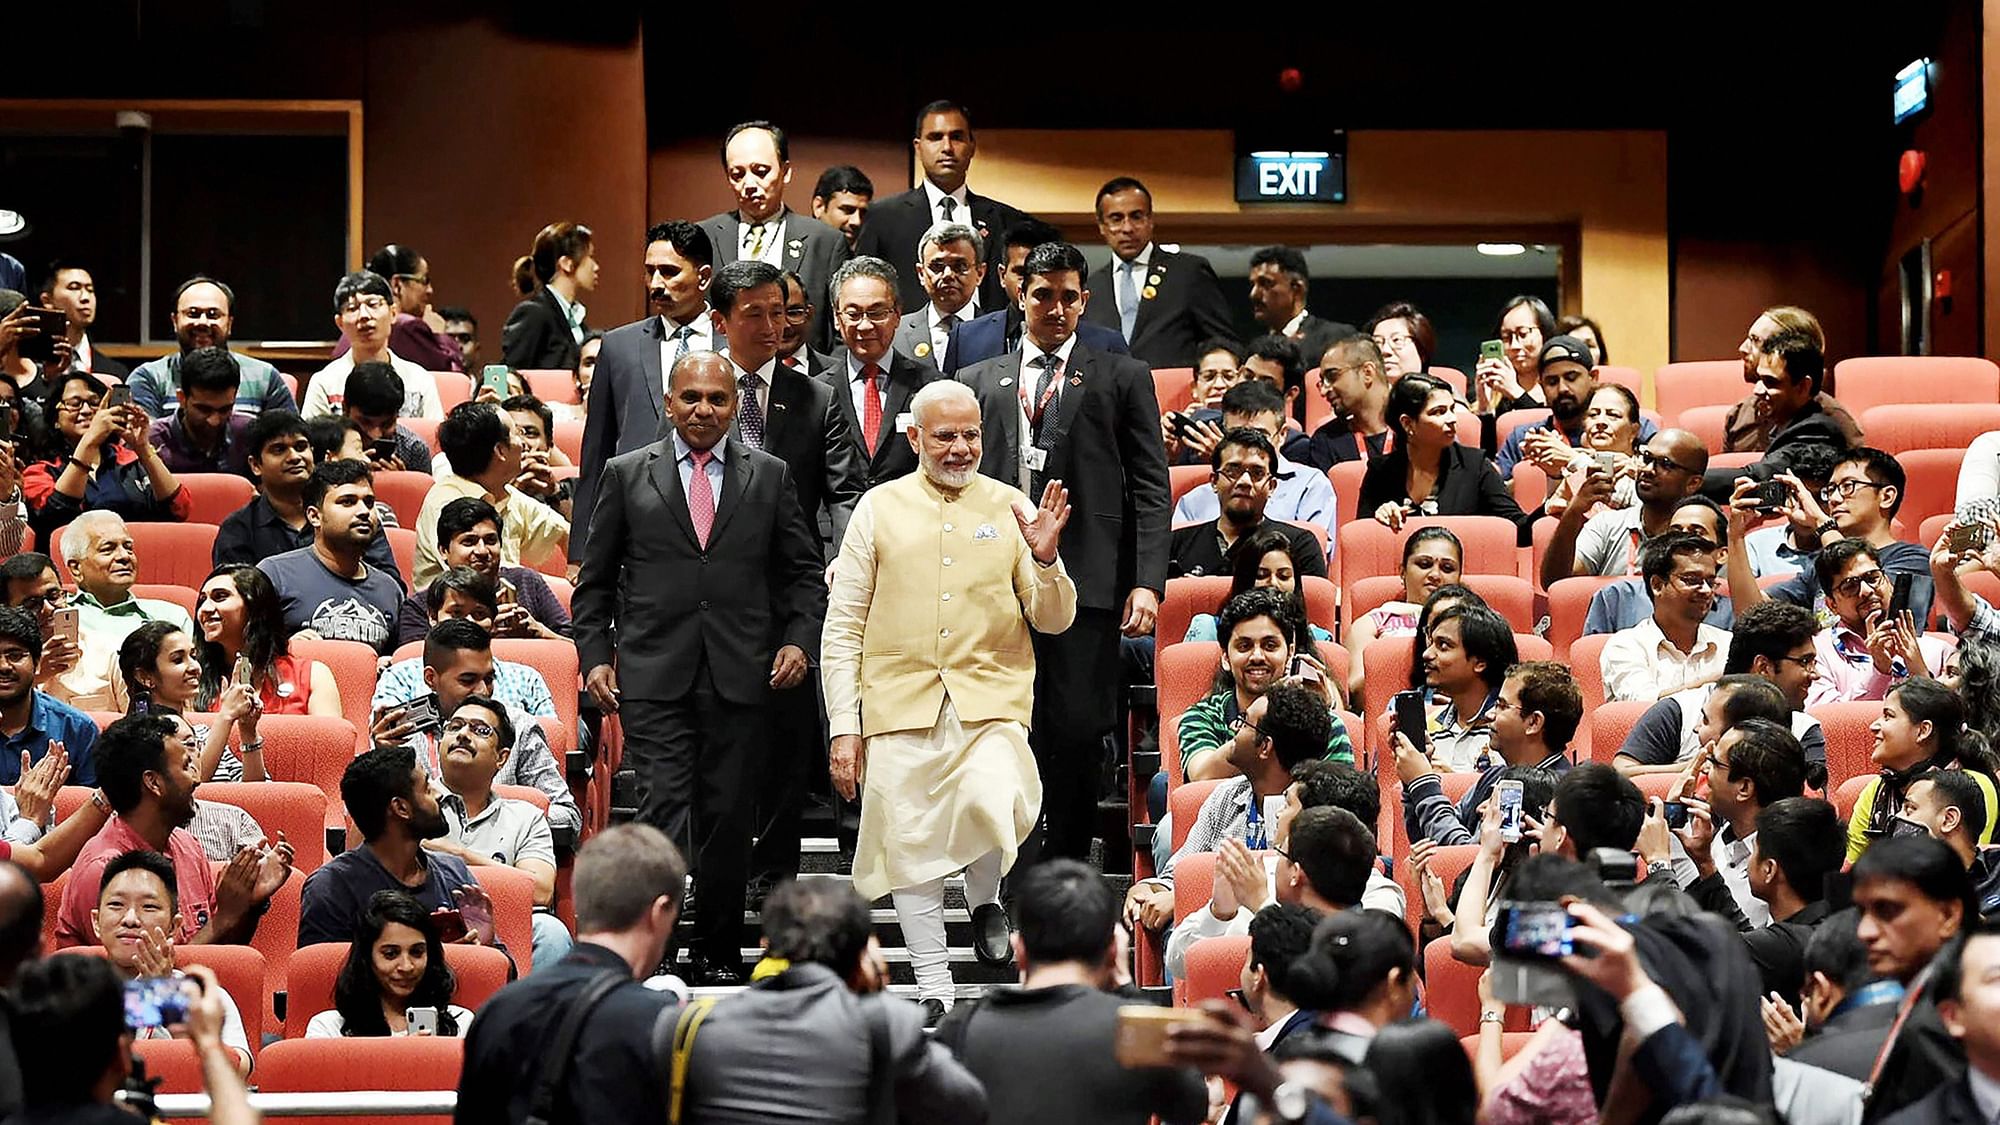 PM Modi speaks about the importance of technology in a dialogue with President Professor of NTU, Subra Suresh.